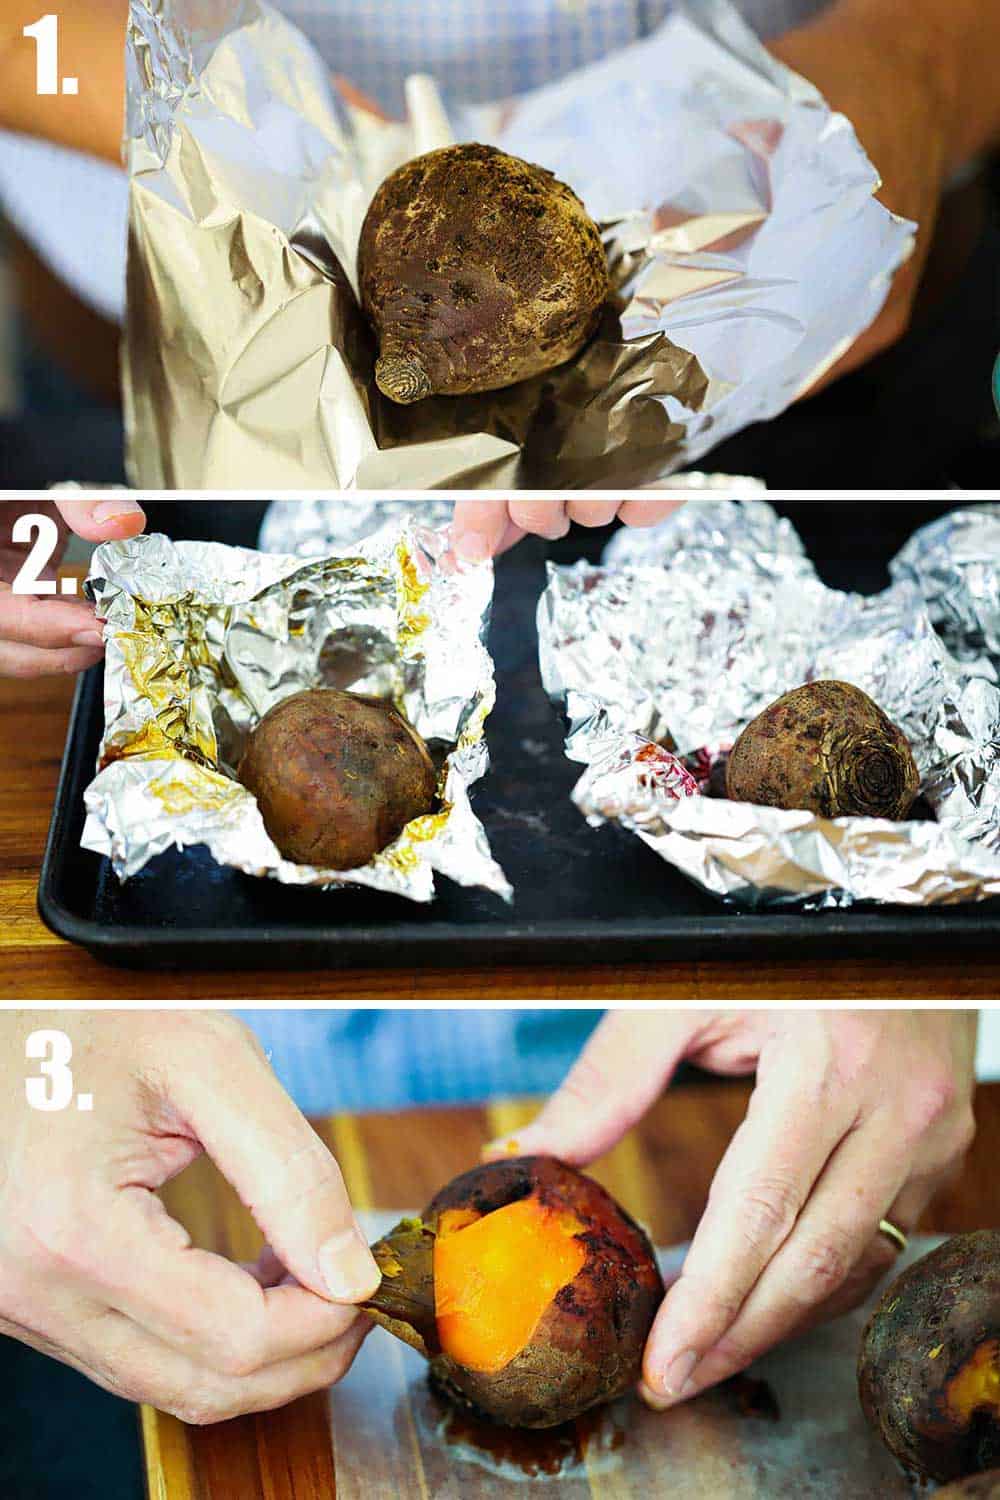 3 images, one of a beet in foil, the next is the beet after being roasted, and then the beet being peeled. 